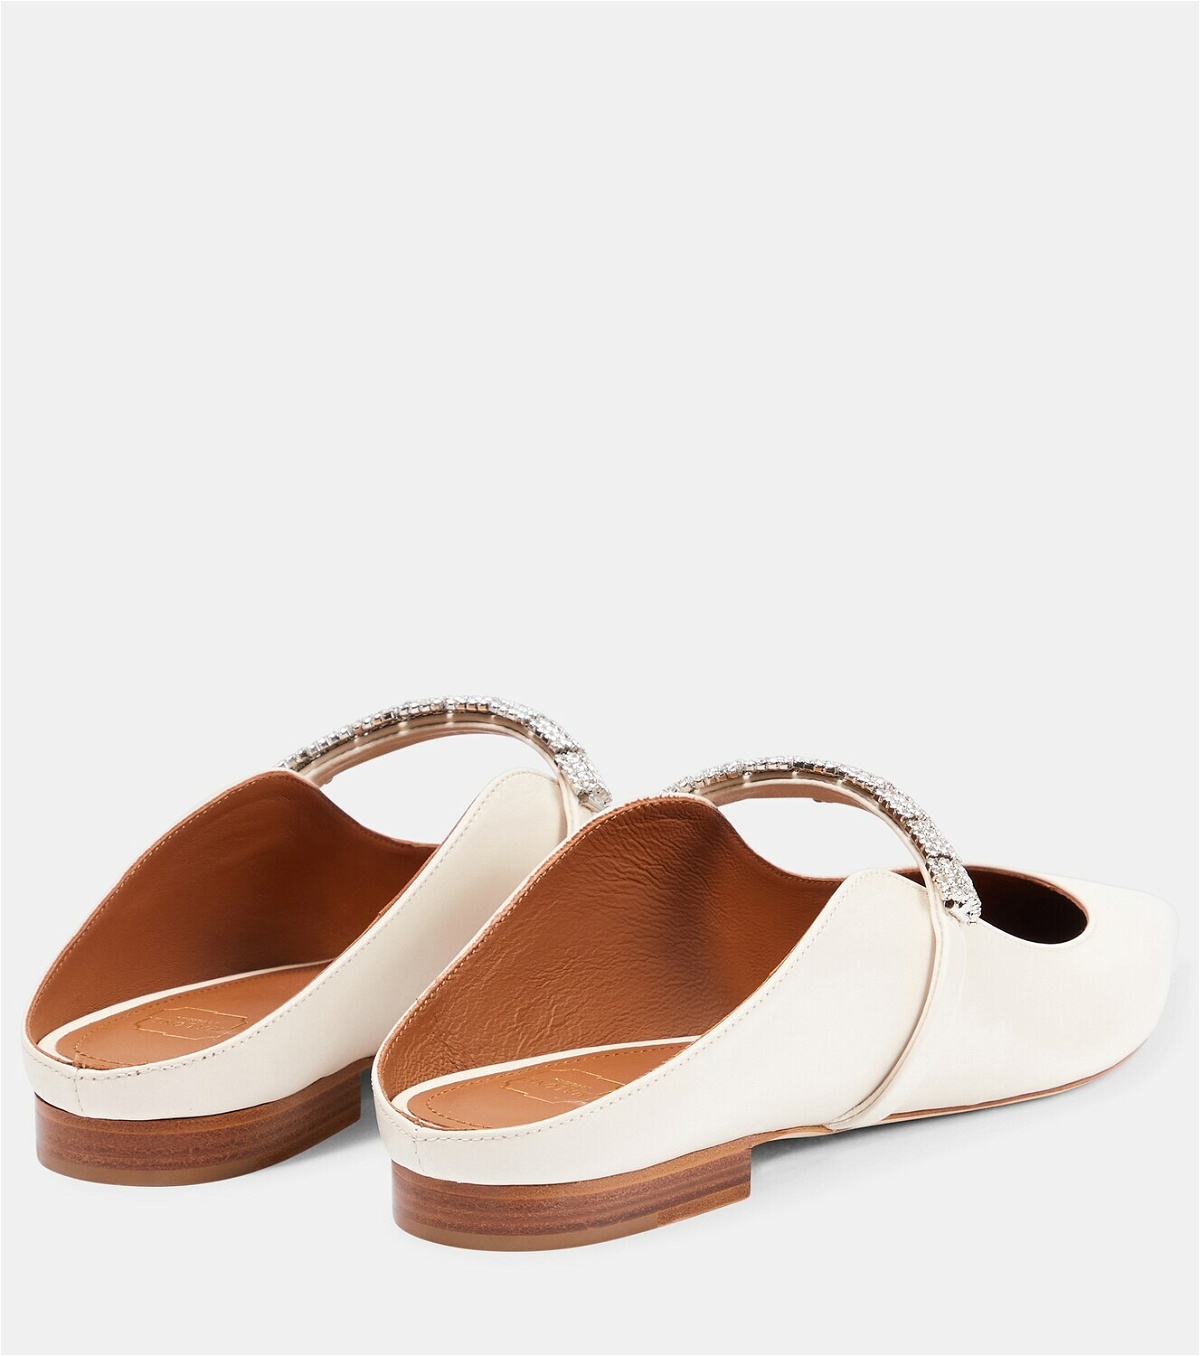 Malone Souliers Bella embellished leather slippers Malone Souliers